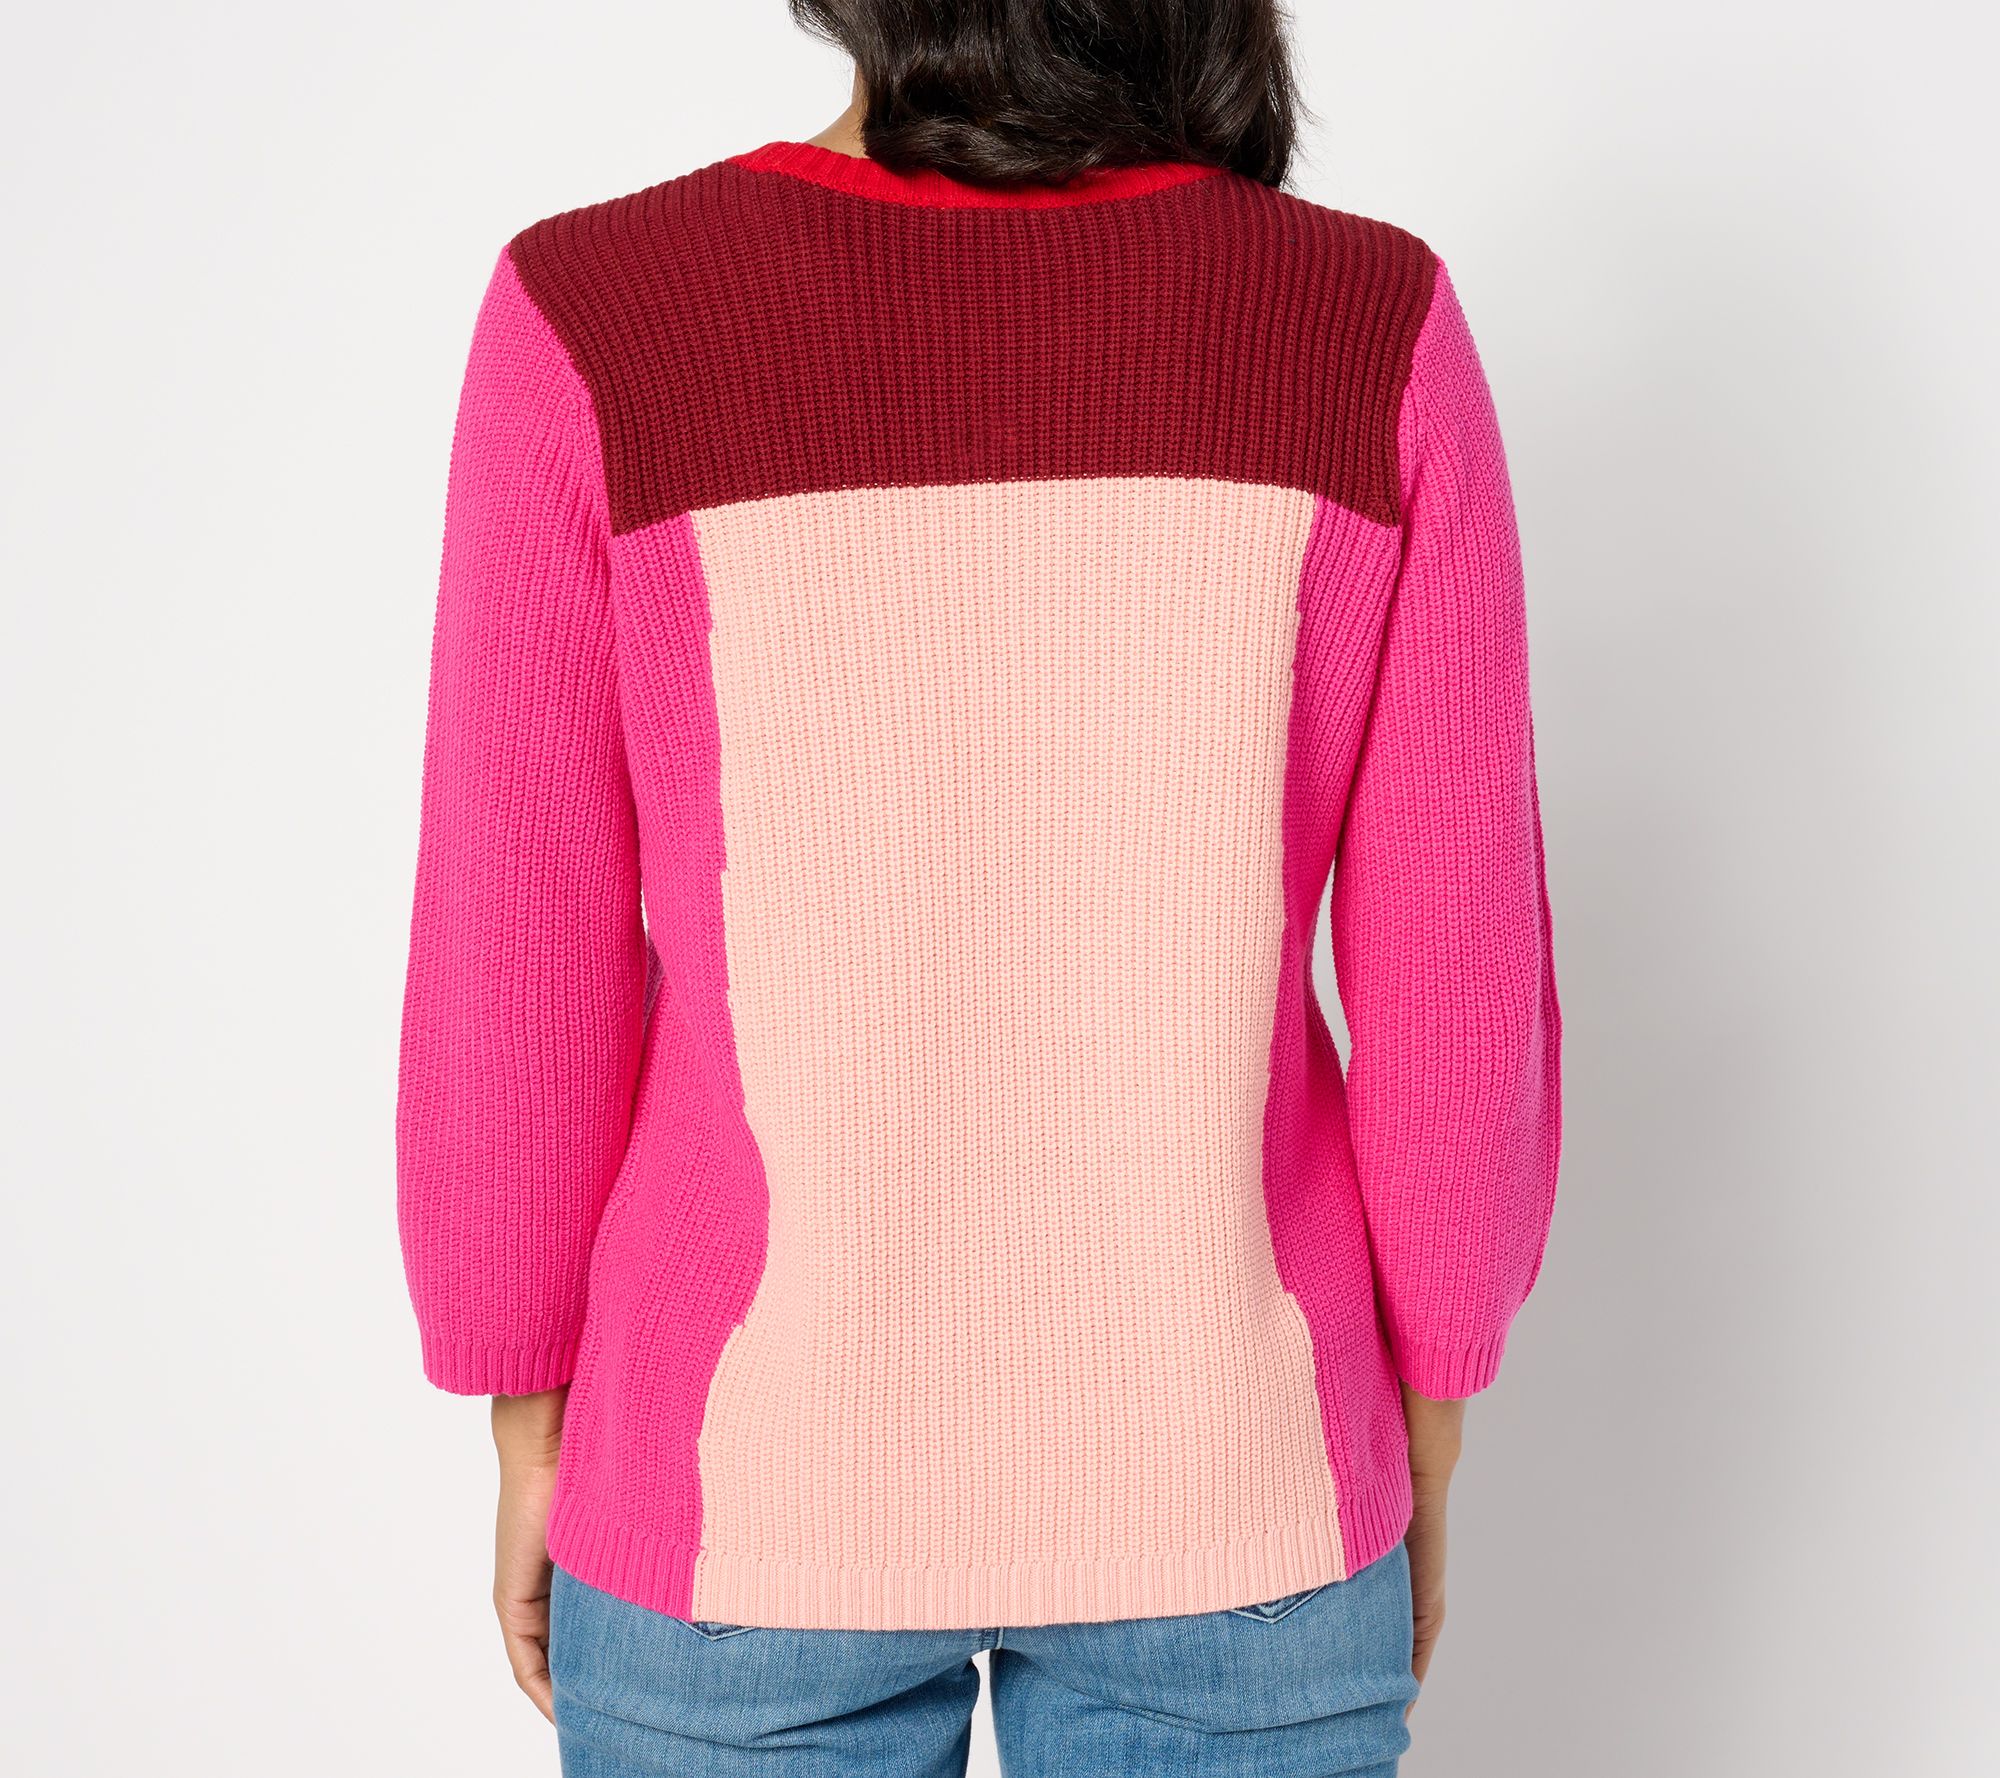 Pink Soda Sweaters & Cardigans - Women - 13 products